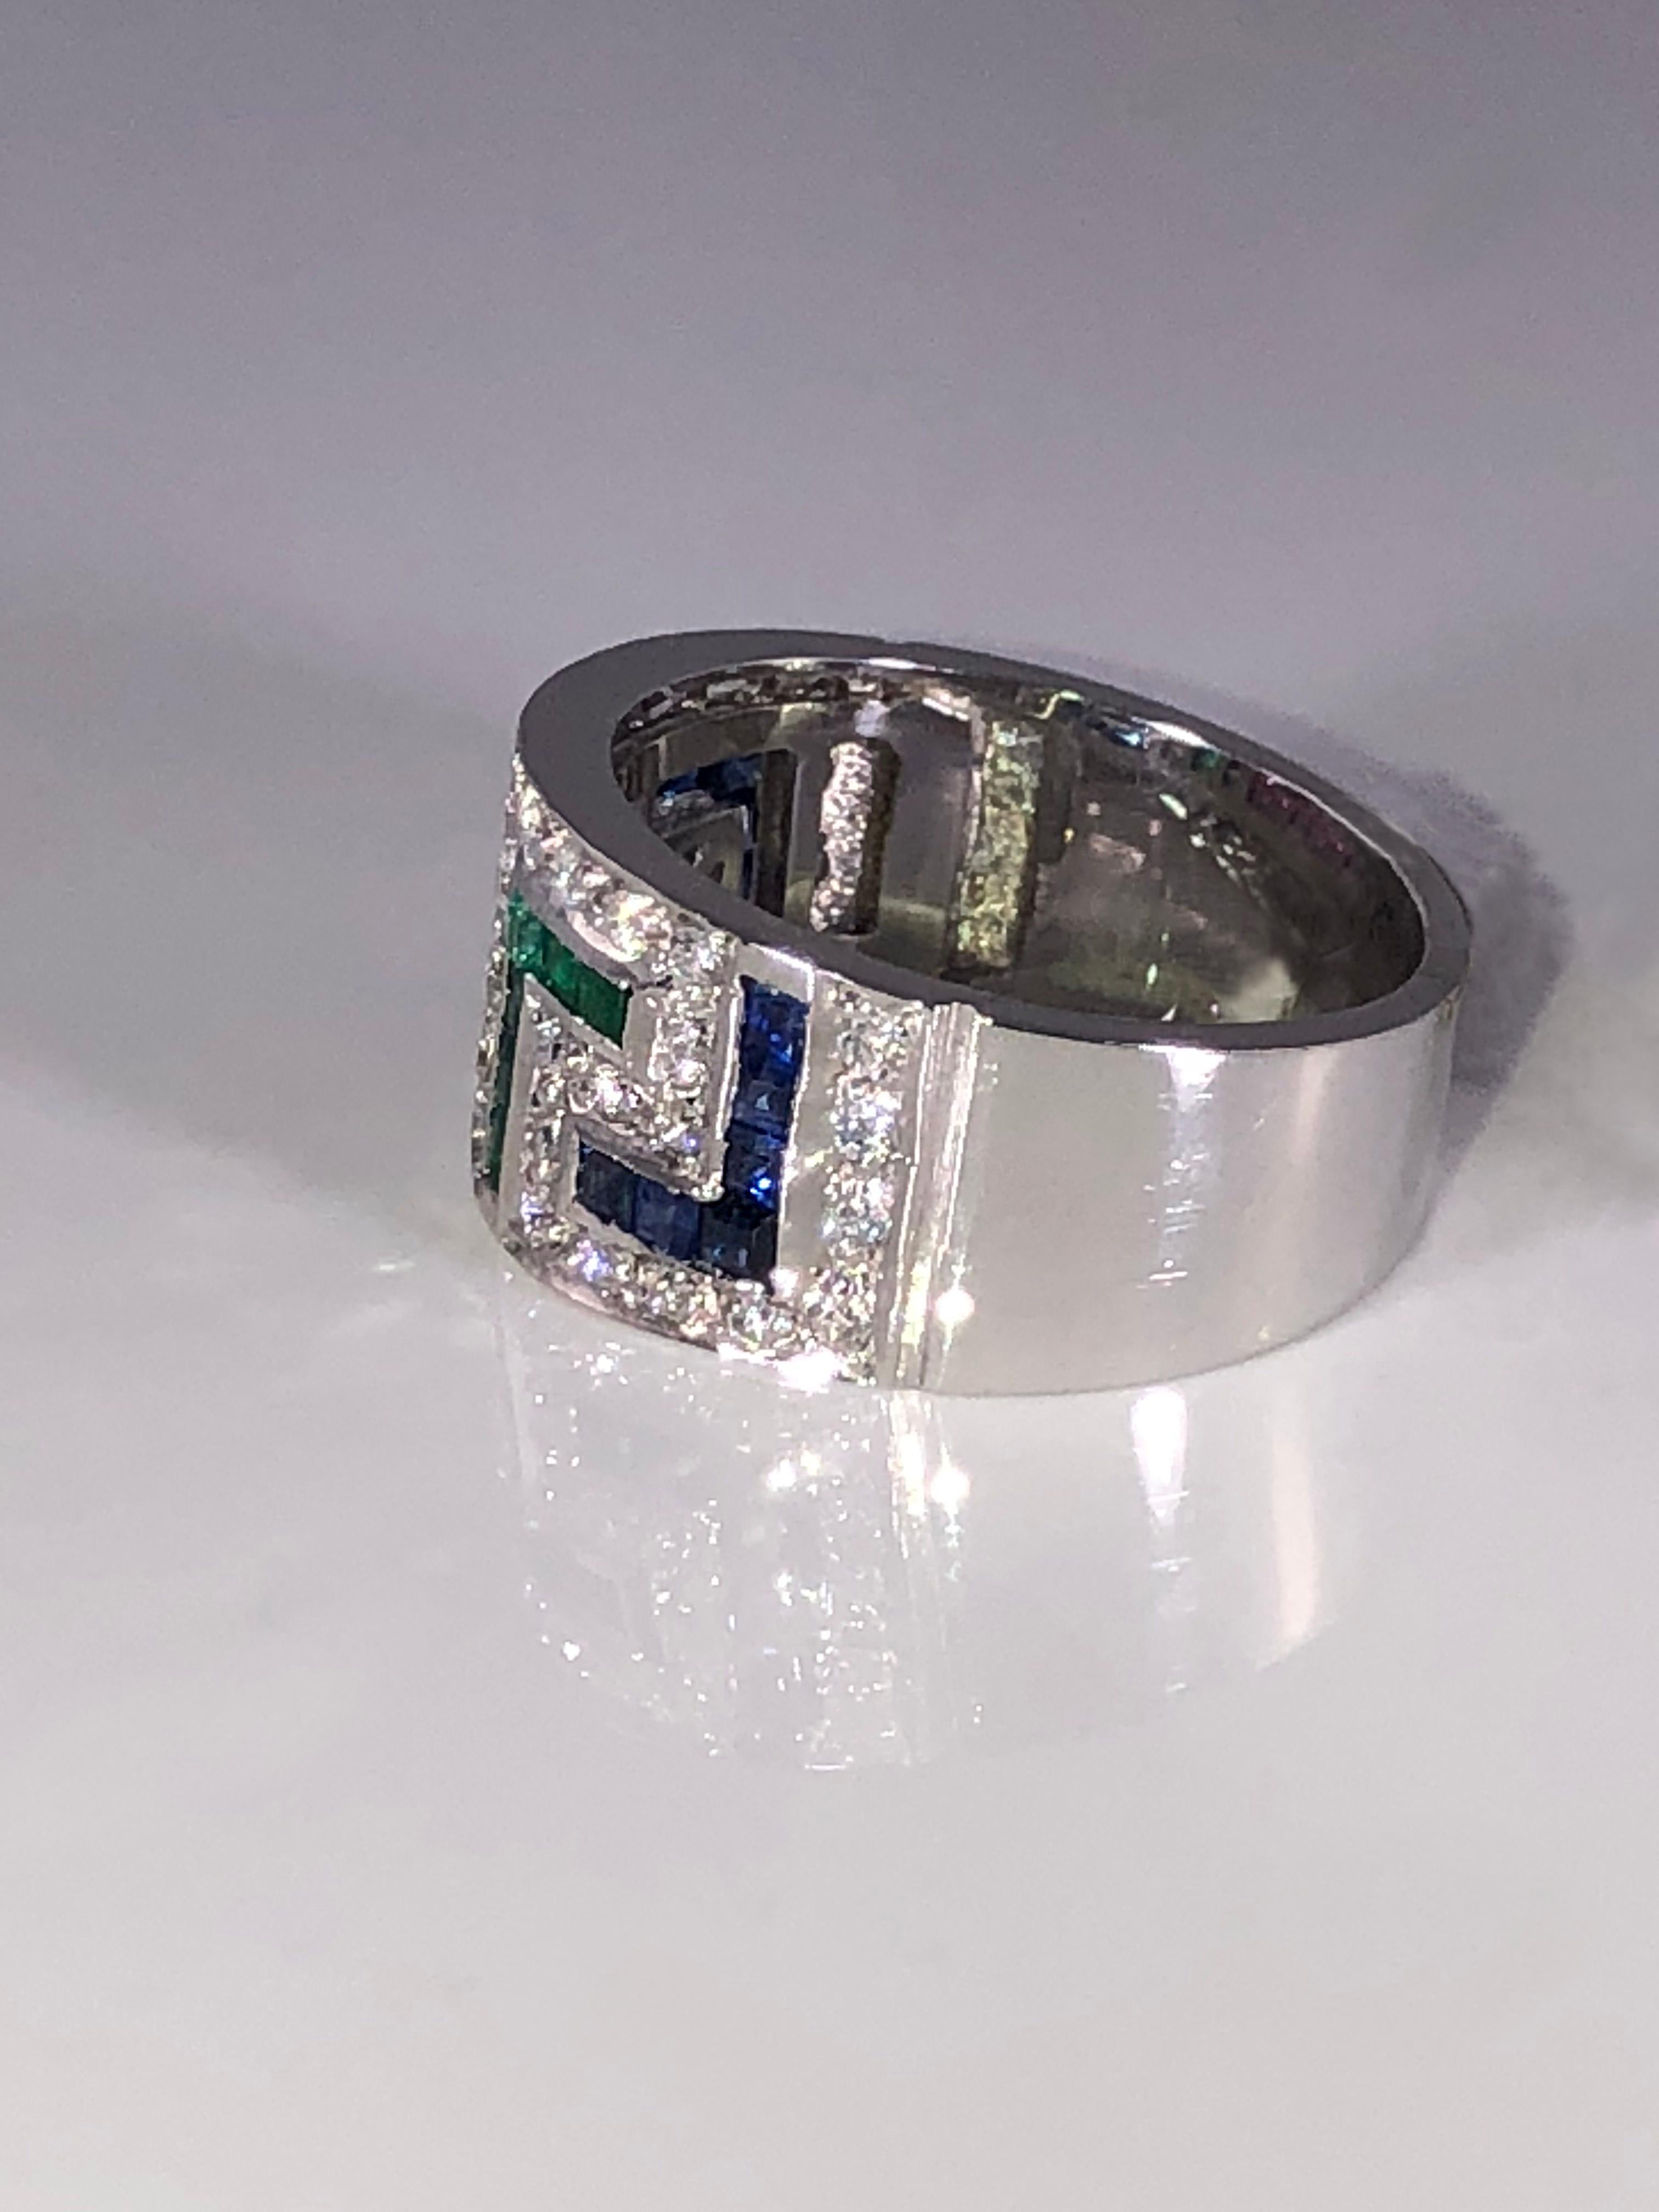 S.Georgios designer 18 Karat White Gold Ring featuring the Greek Key design symbolizing eternity. It has Brilliant Cut White Diamonds total weight of 0.44 Carat, and Princess cut Rubies, Sapphires and Emeralds total weight of 1.05 Carat. The quality